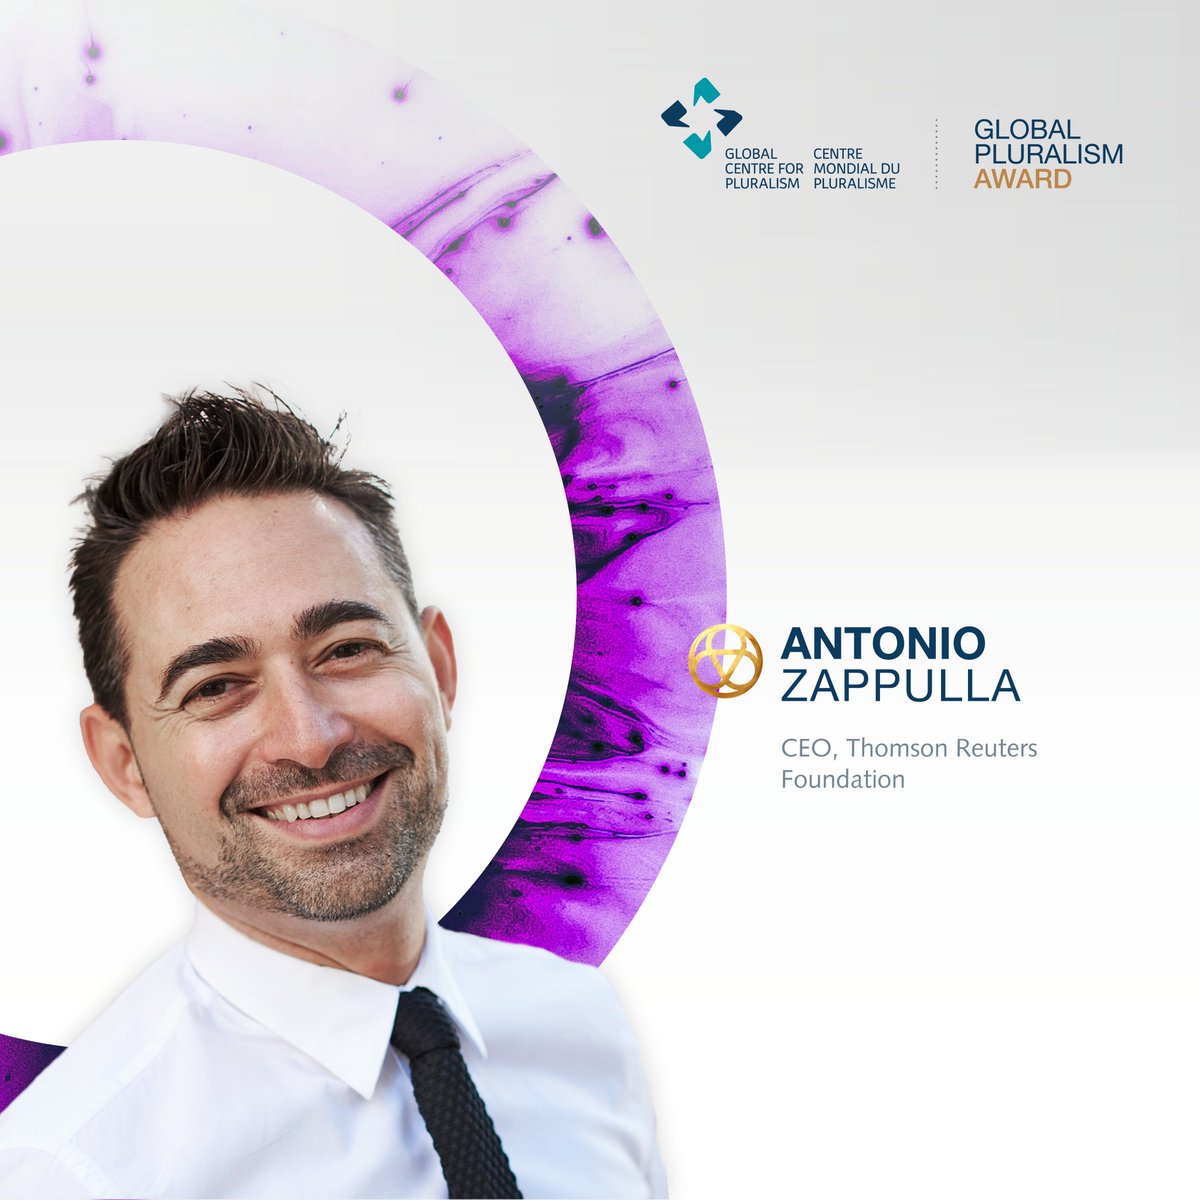 ✨ We're honored to have Mr. Antonio Zappulla (@antozappulla) as one of the new jurors for the 2025 #GlobalPluralismAward! 🎉

'Throughout my career, I've witnessed firsthand the power of pluralism to bridge divides, foster understanding, and unlock human potential across